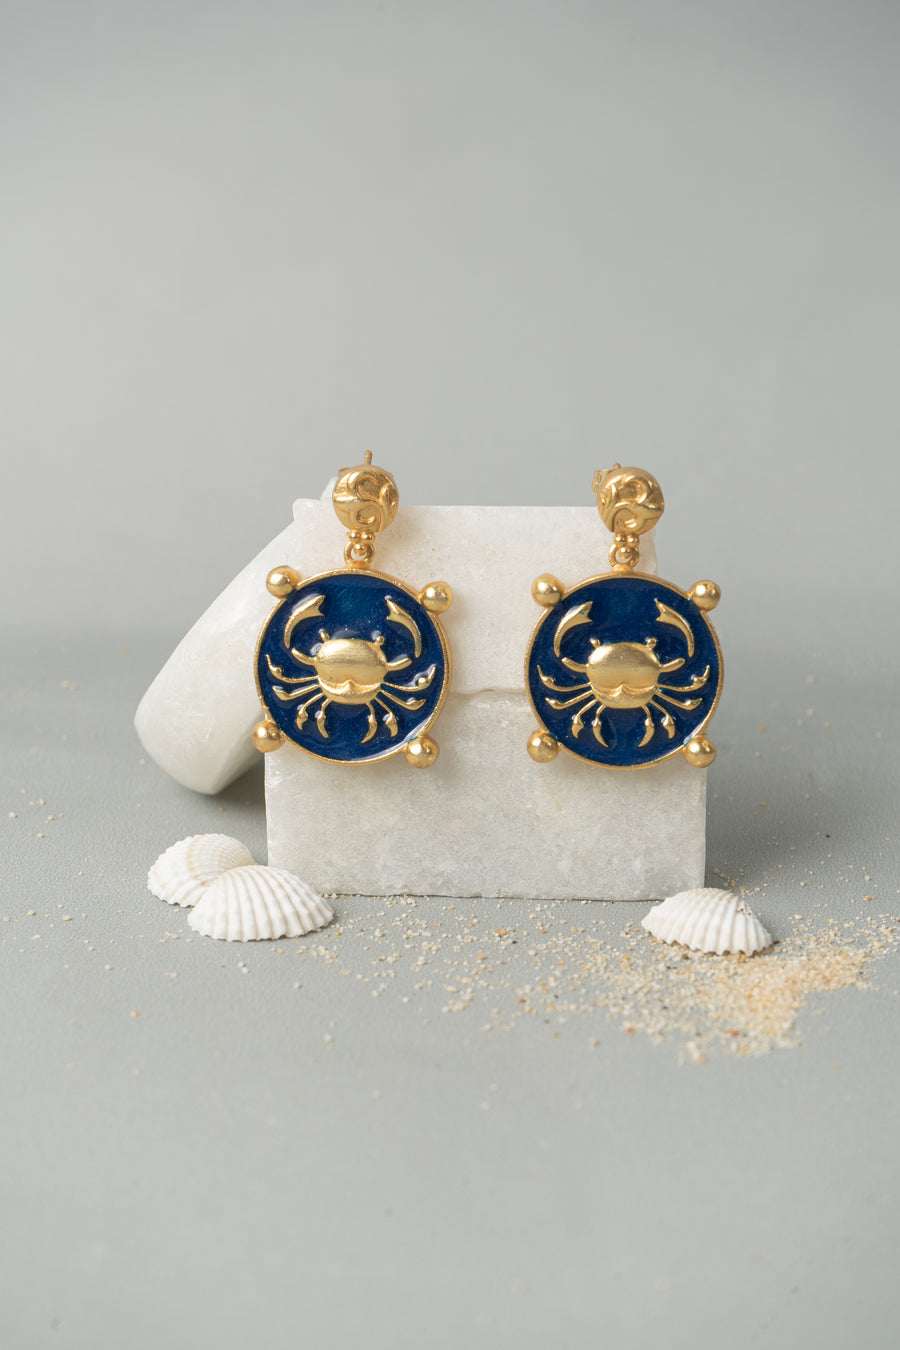 Crazy Cancer Earrings Amama